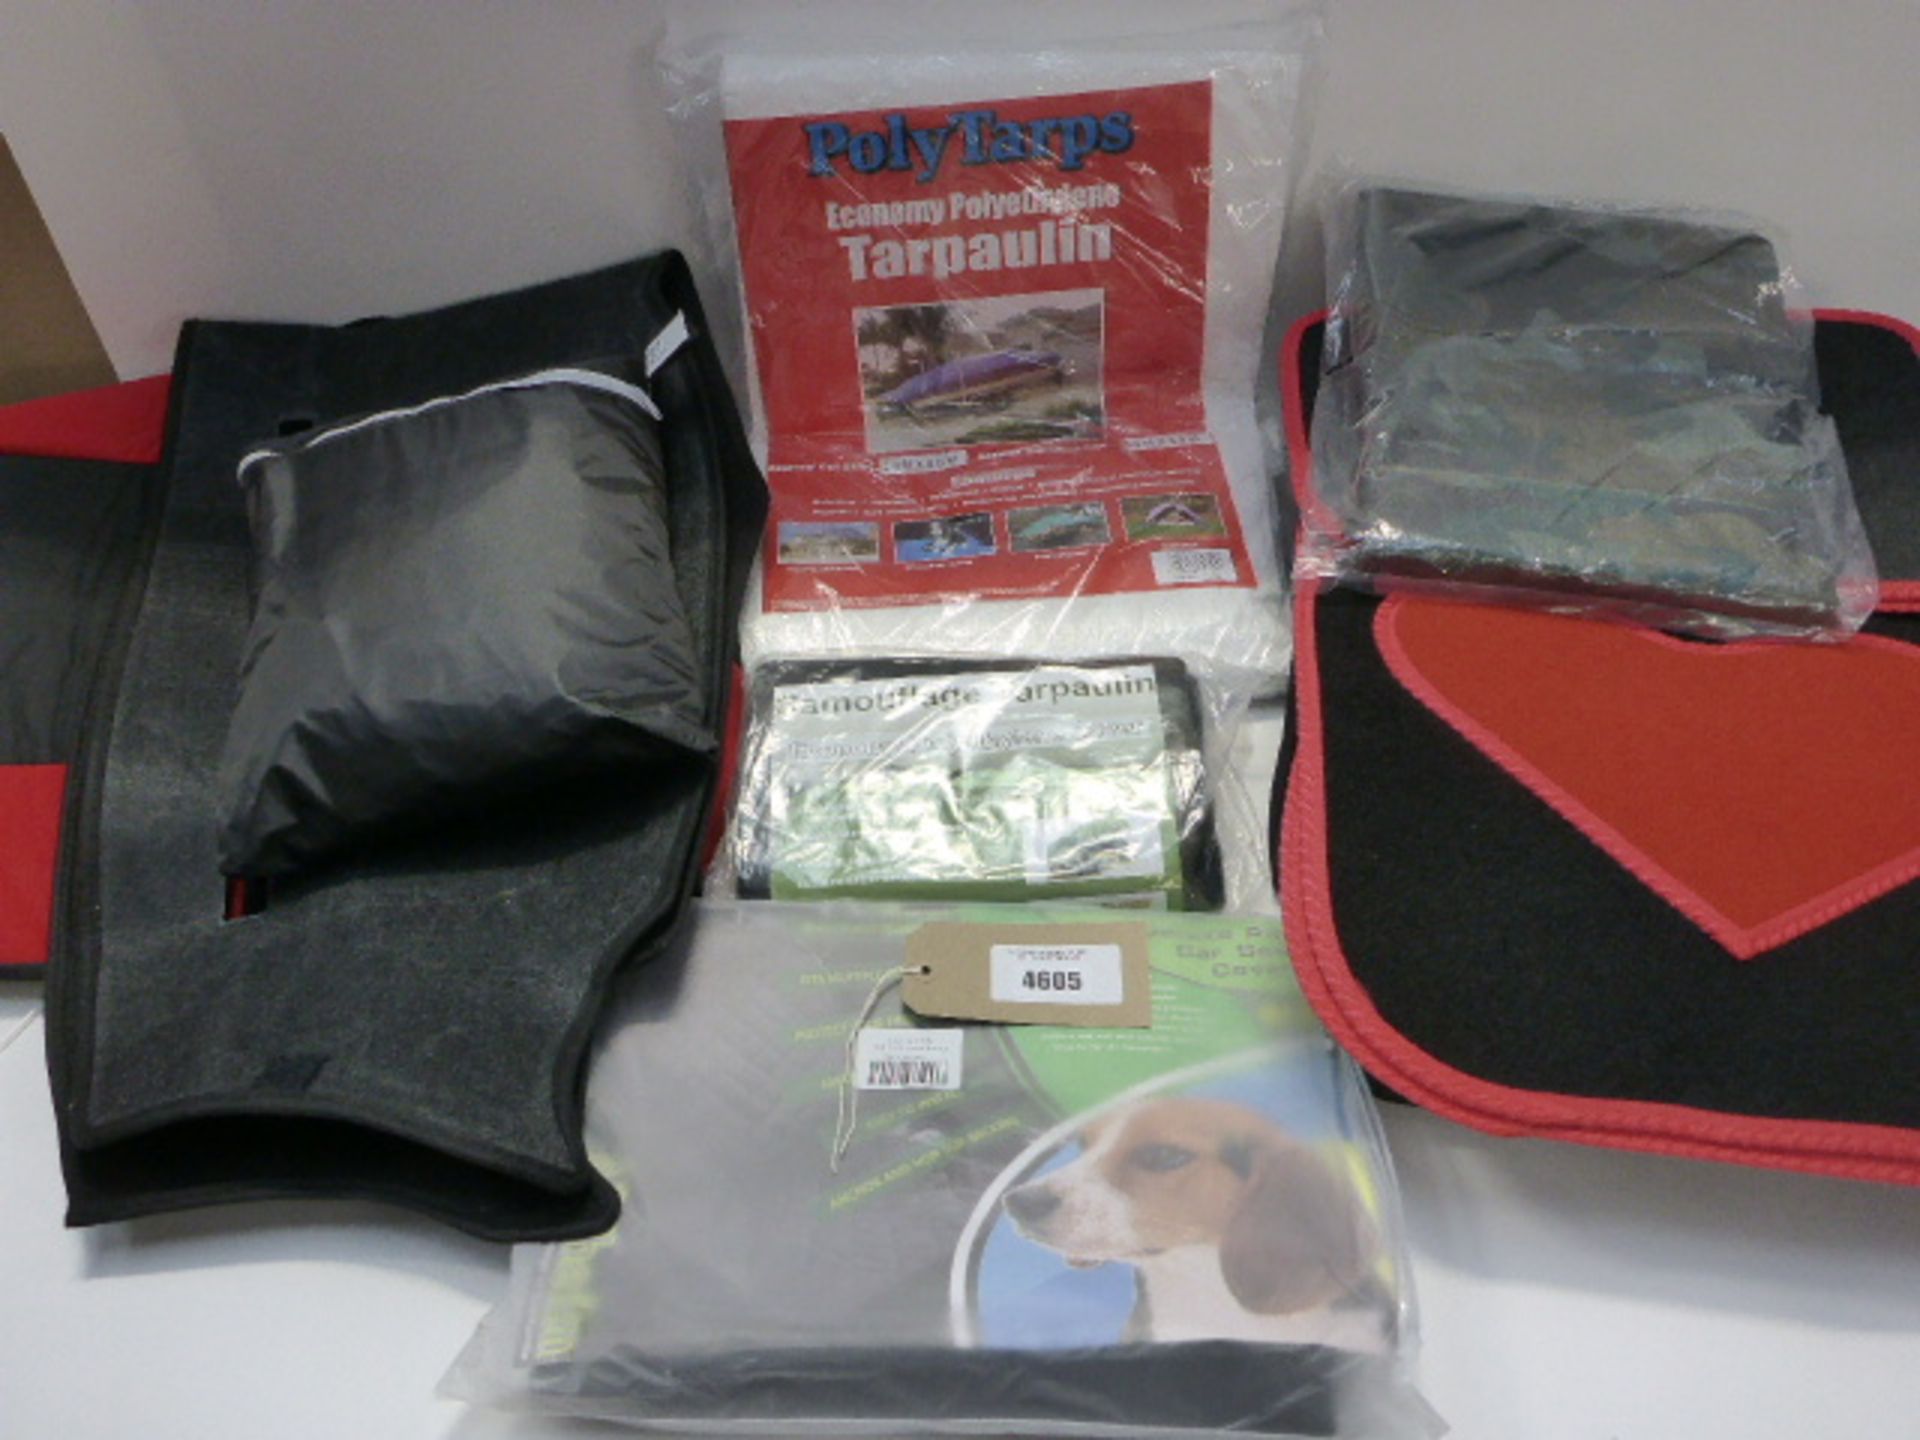 Bag containing Love Heart car mats, deluxe pet car seat cover, tarpaulins, and other car seat covers